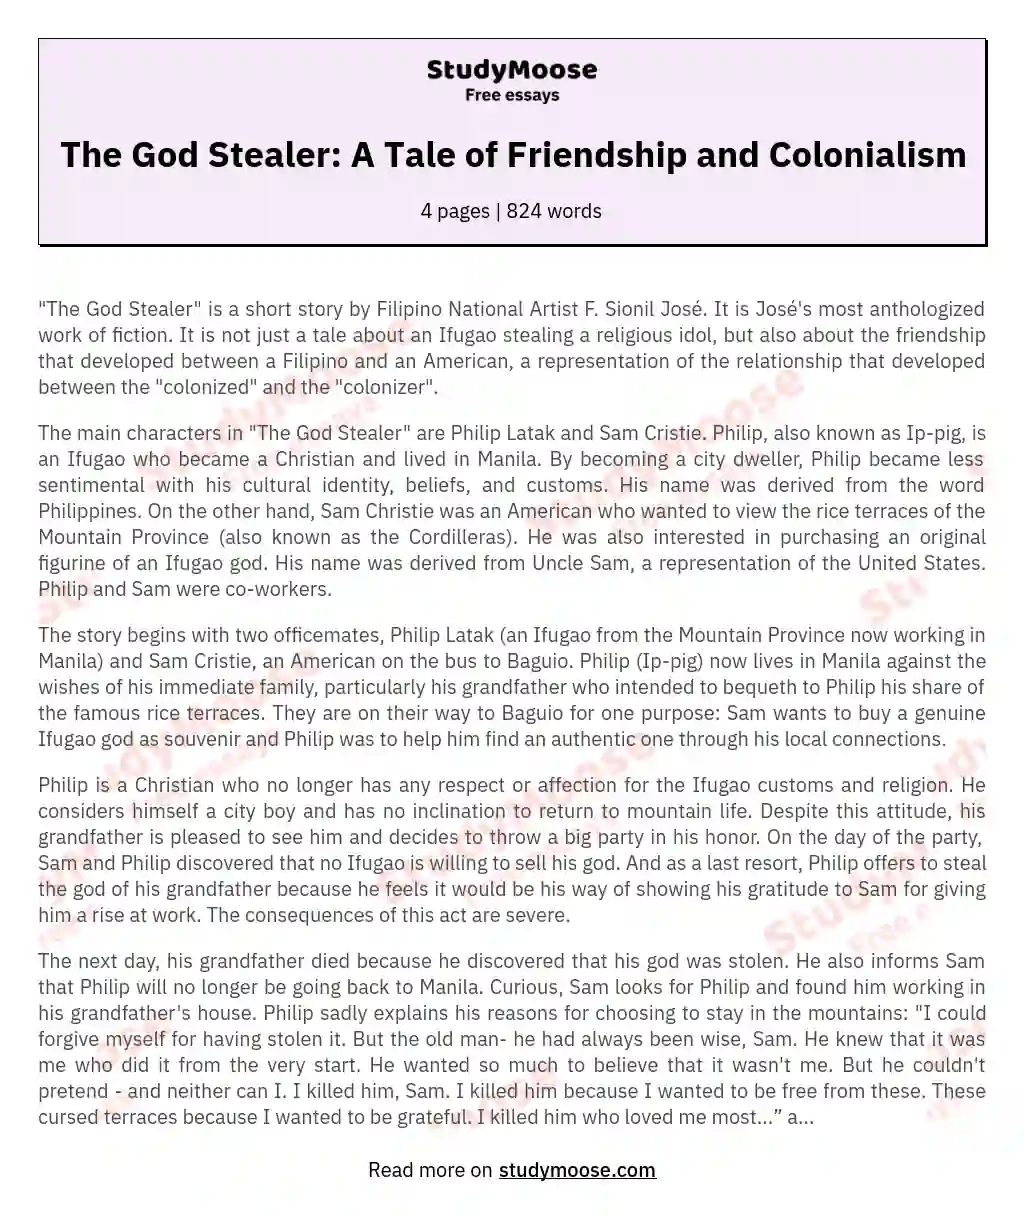 The God Stealer: A Tale of Friendship and Colonialism essay